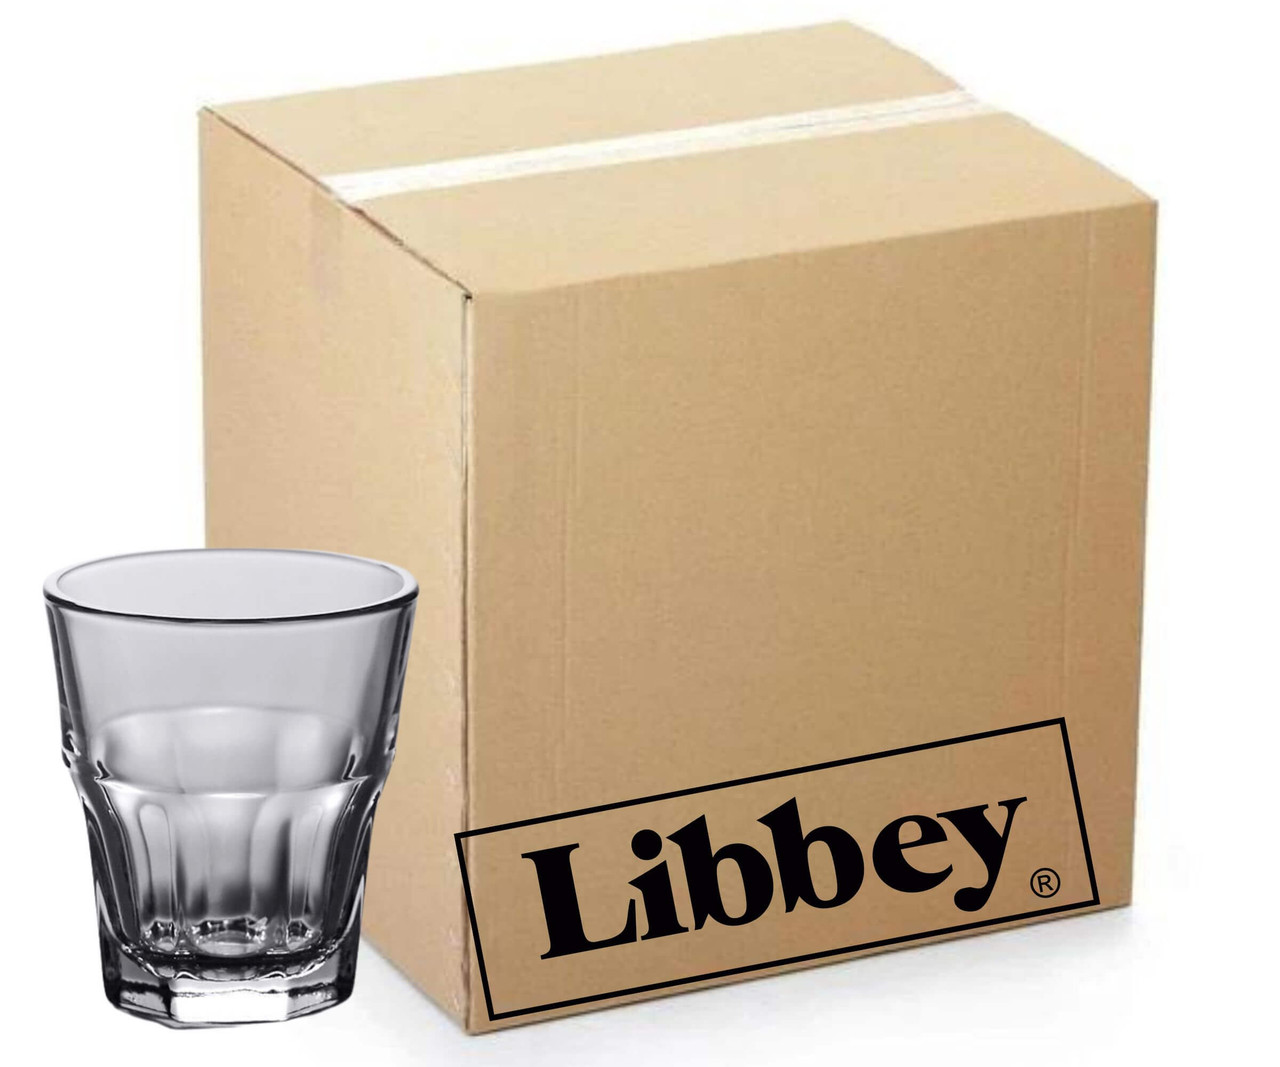 Libbey's 36/Case Gibraltar 5.5 oz. Rocks/Old Fashioned Glass-Chicken Pieces